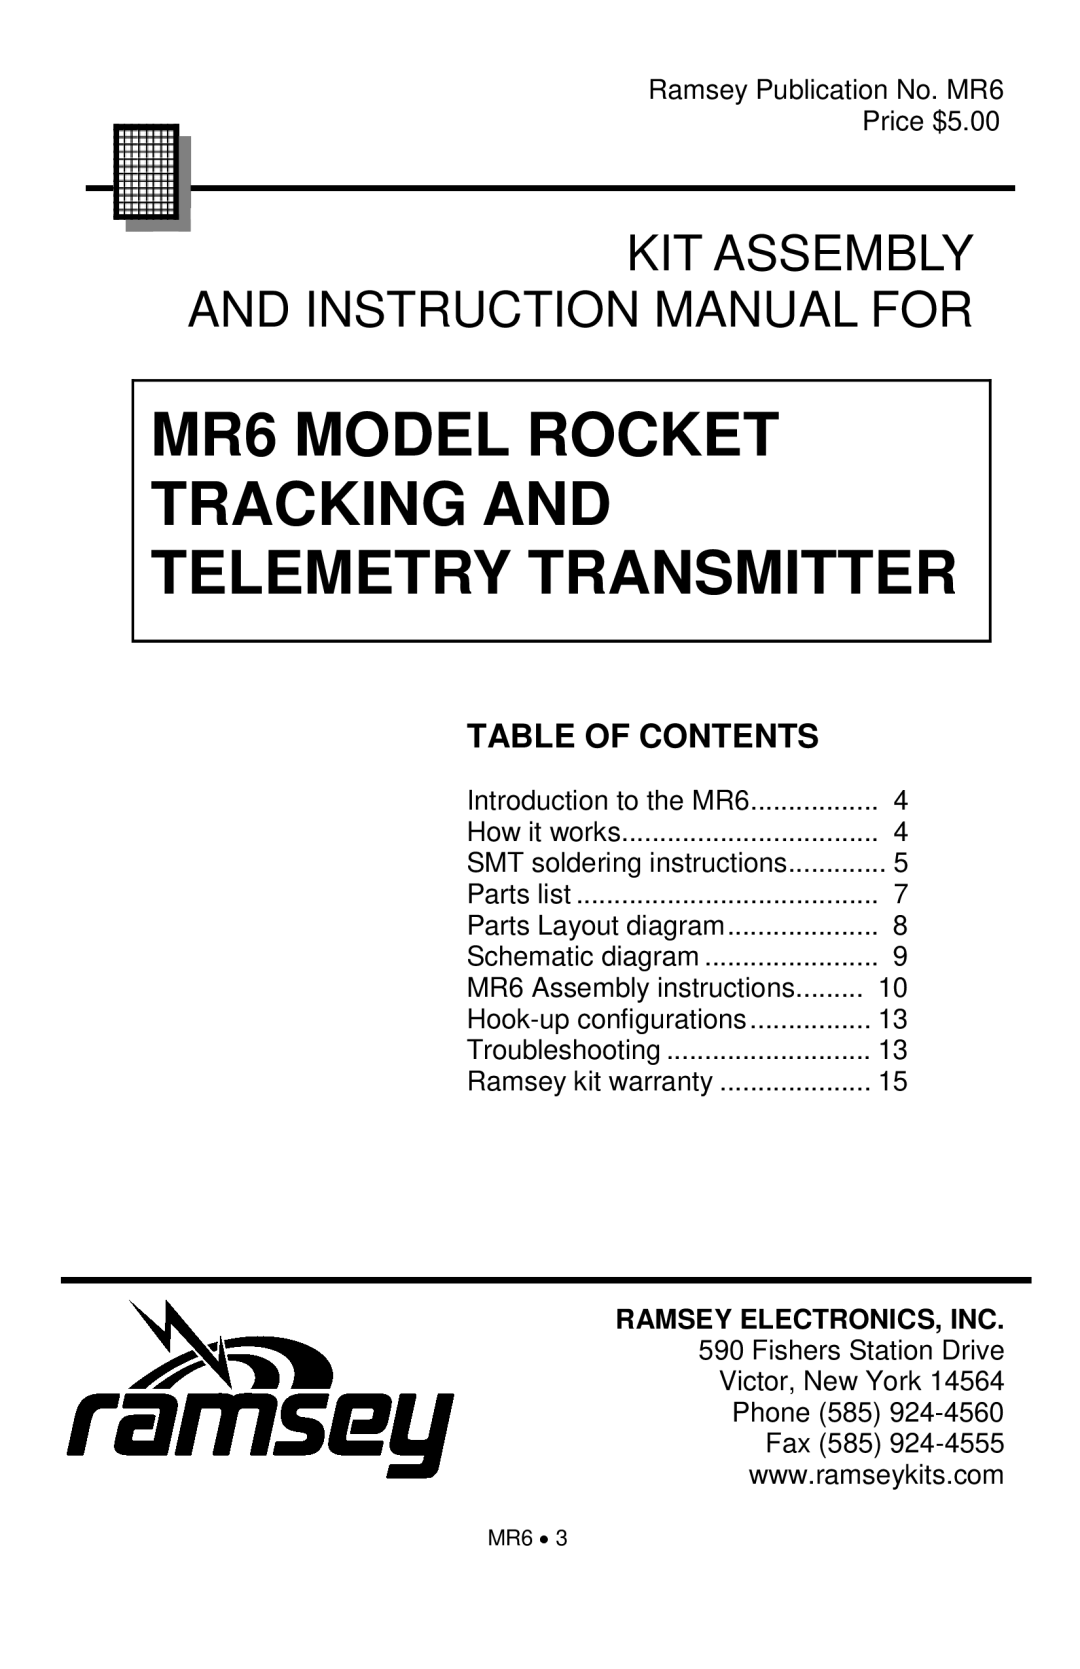 Ramsey Electronics MR6 manual Table Of Contents, Kit Assembly 